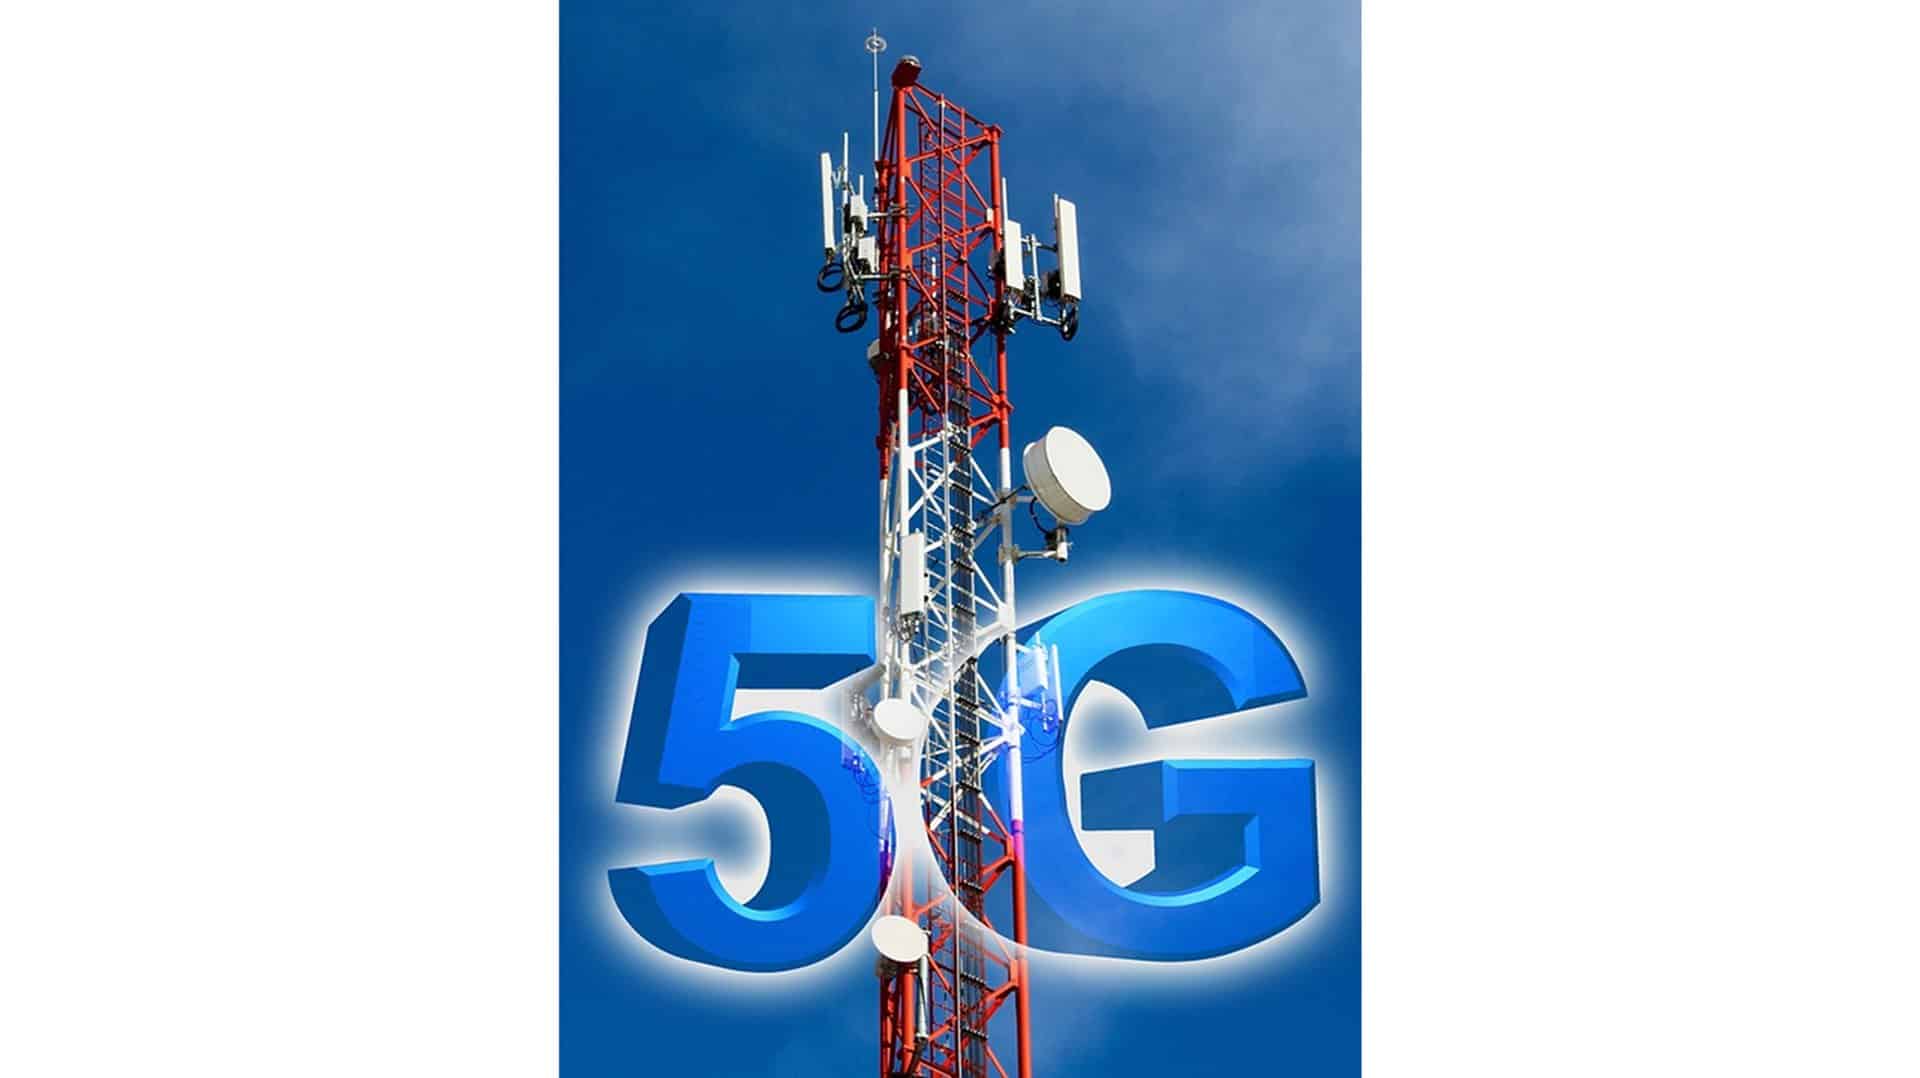 Reliance Jio completes 5G coverage plans for 1000 cities